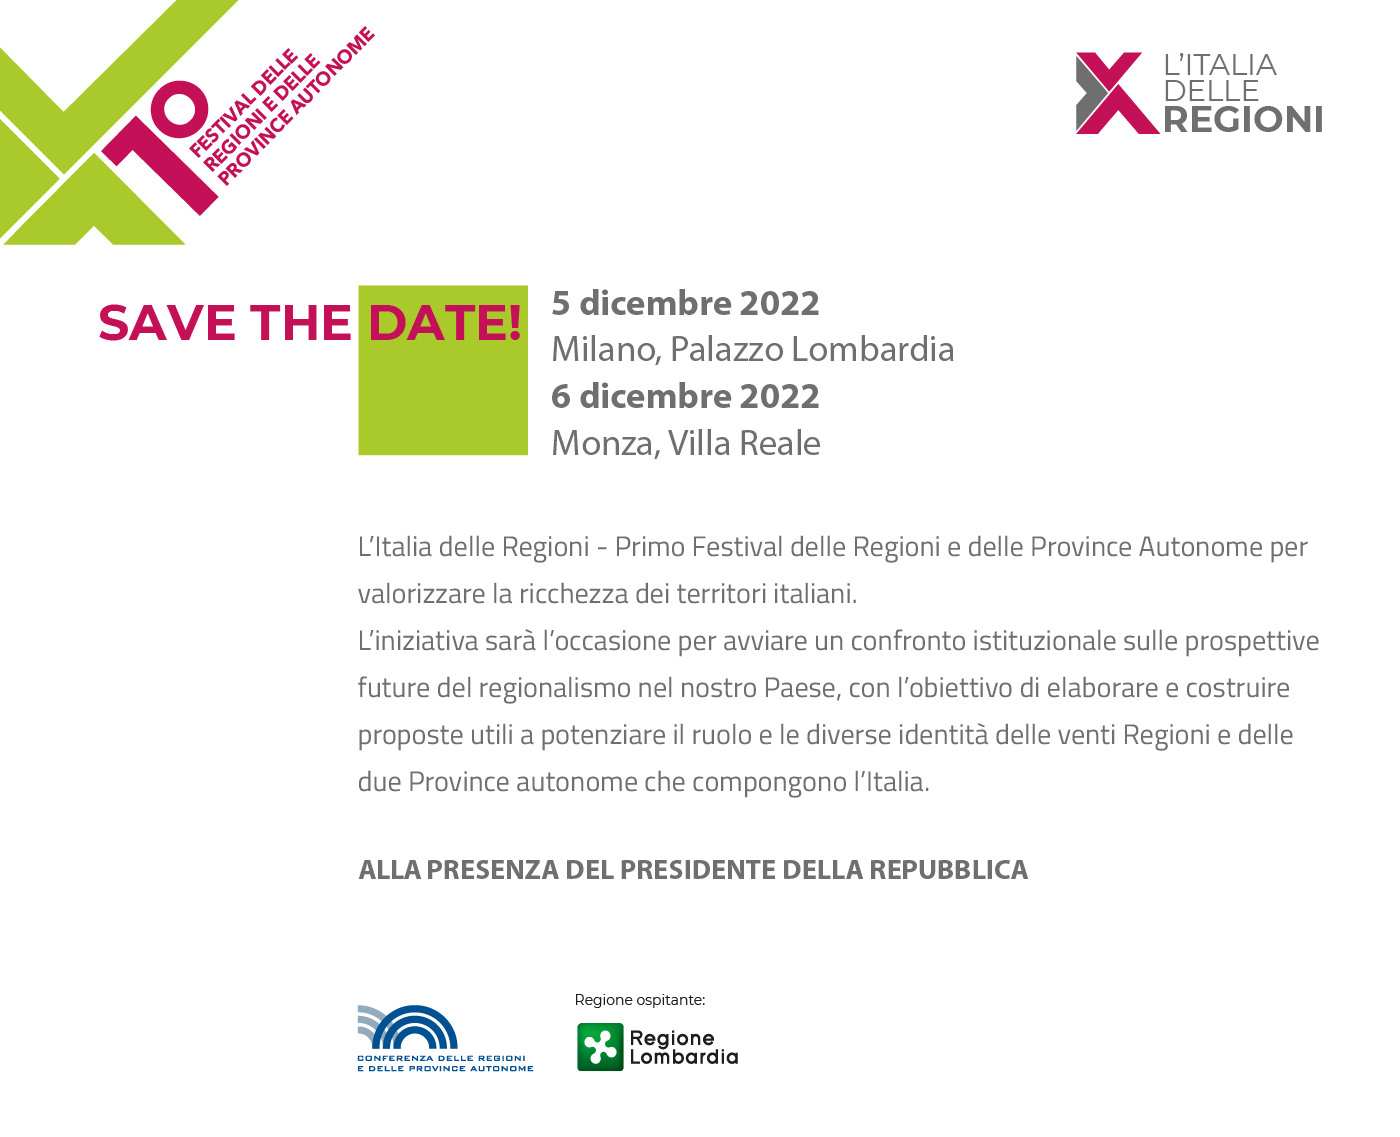 file/ELEMENTO_NEWSLETTER/24939/Save-the-date_UFFICIALE_festival_regioni_5_6_12_22_NL.png